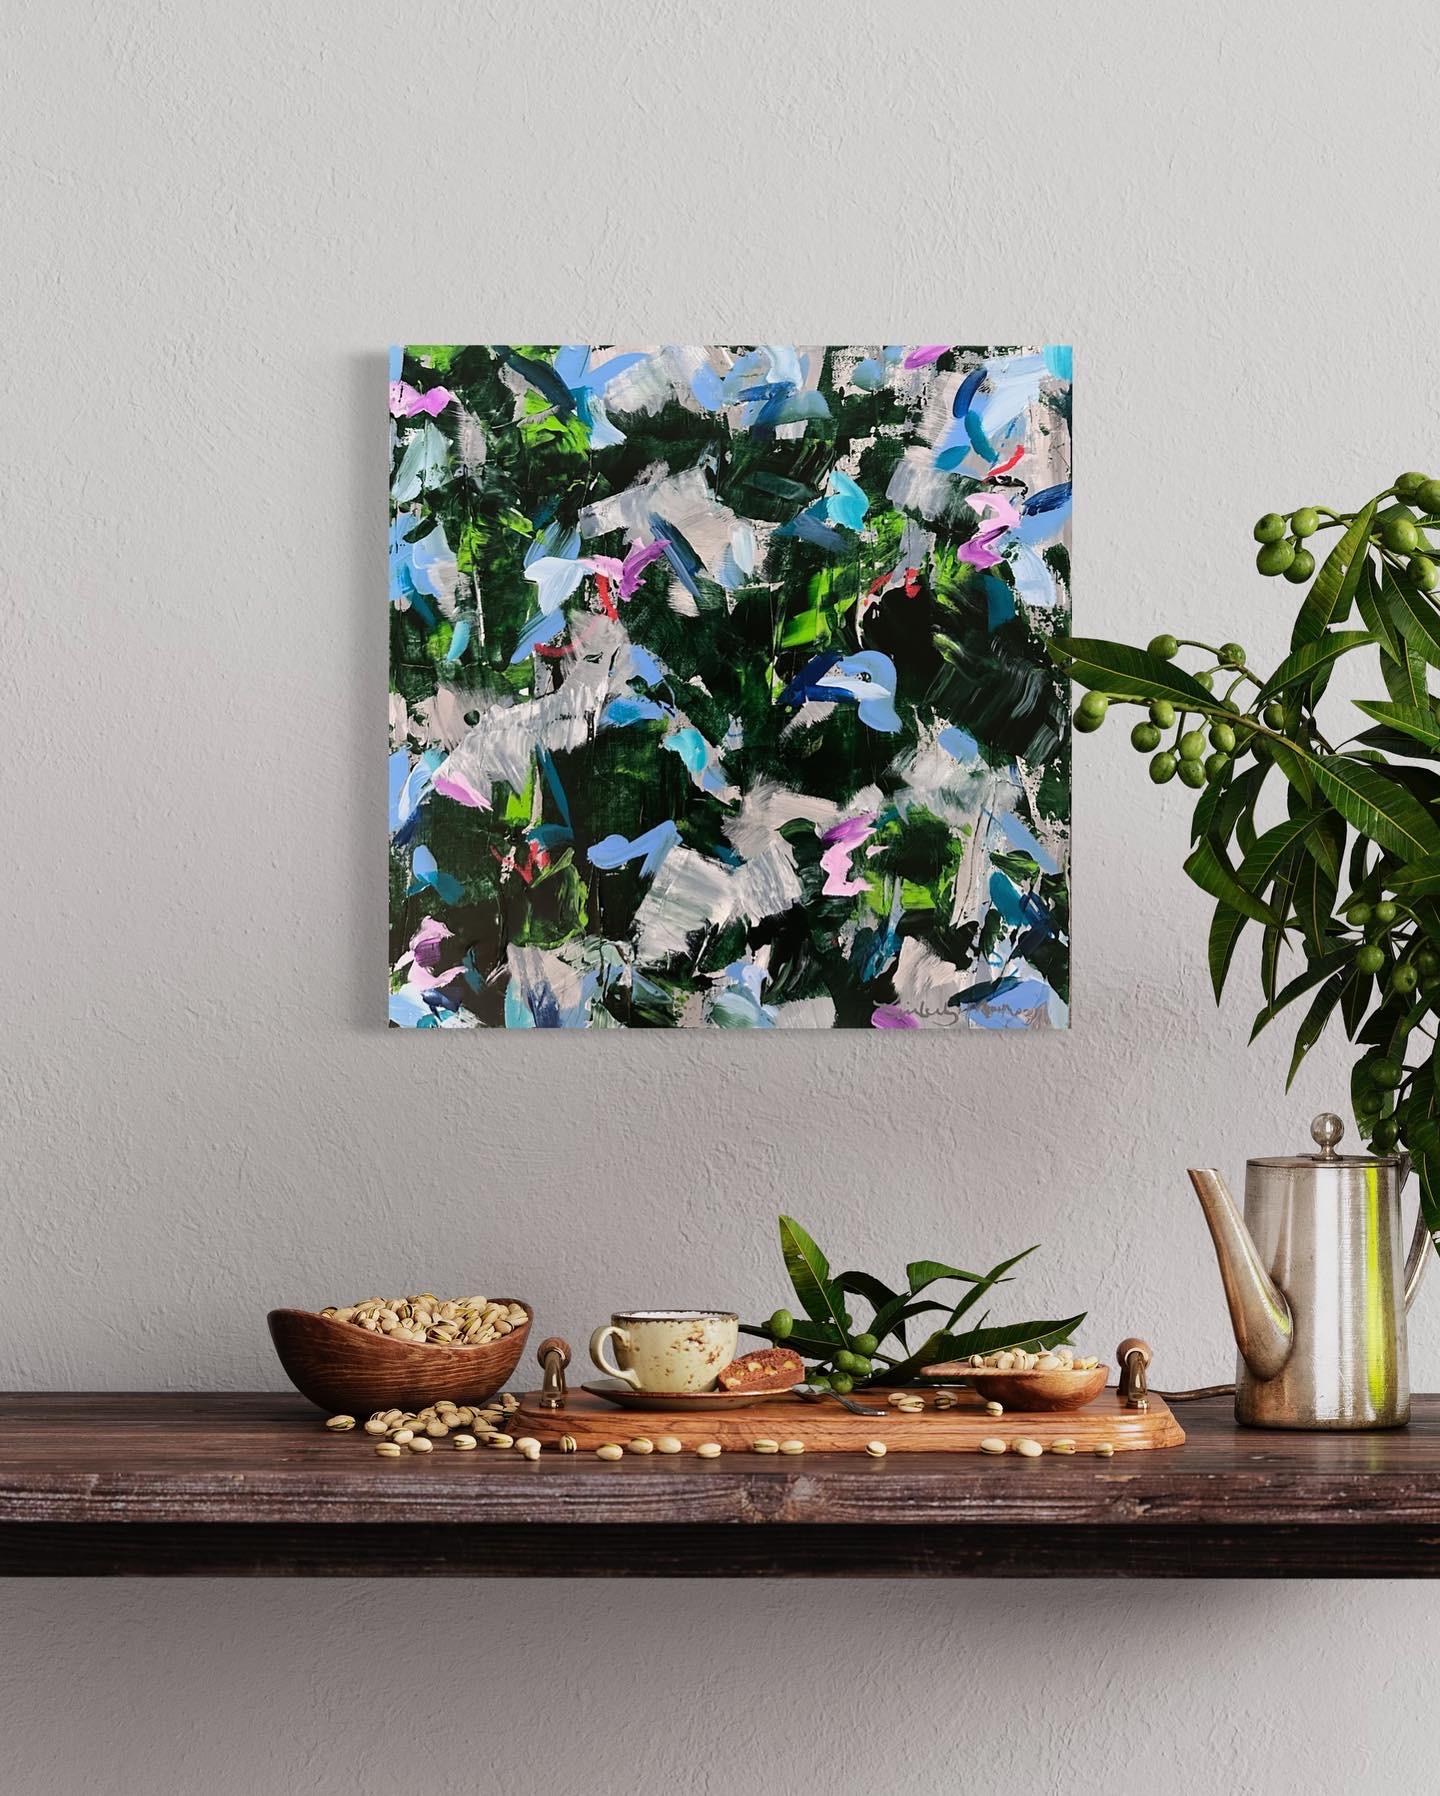 Jungle Love (Abstract, Green, Blue, Jungle, Tropical, Foliage, Nature) - Painting by Kimberly Marney